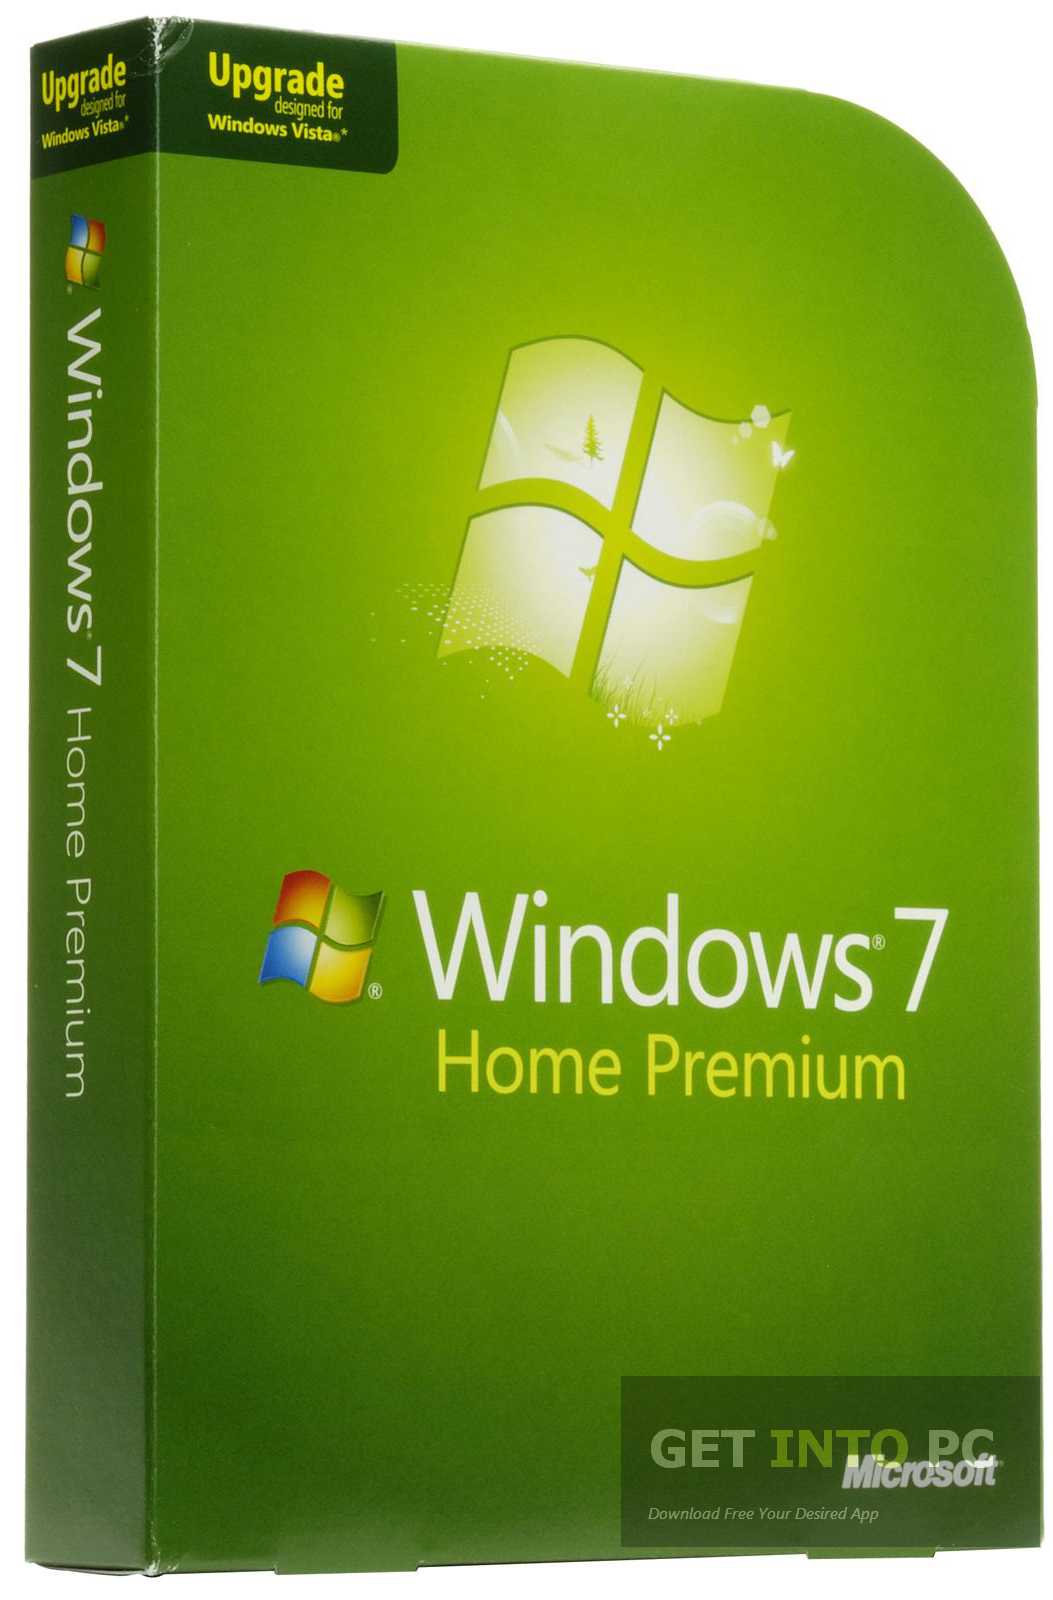 Windows 7 image iso download